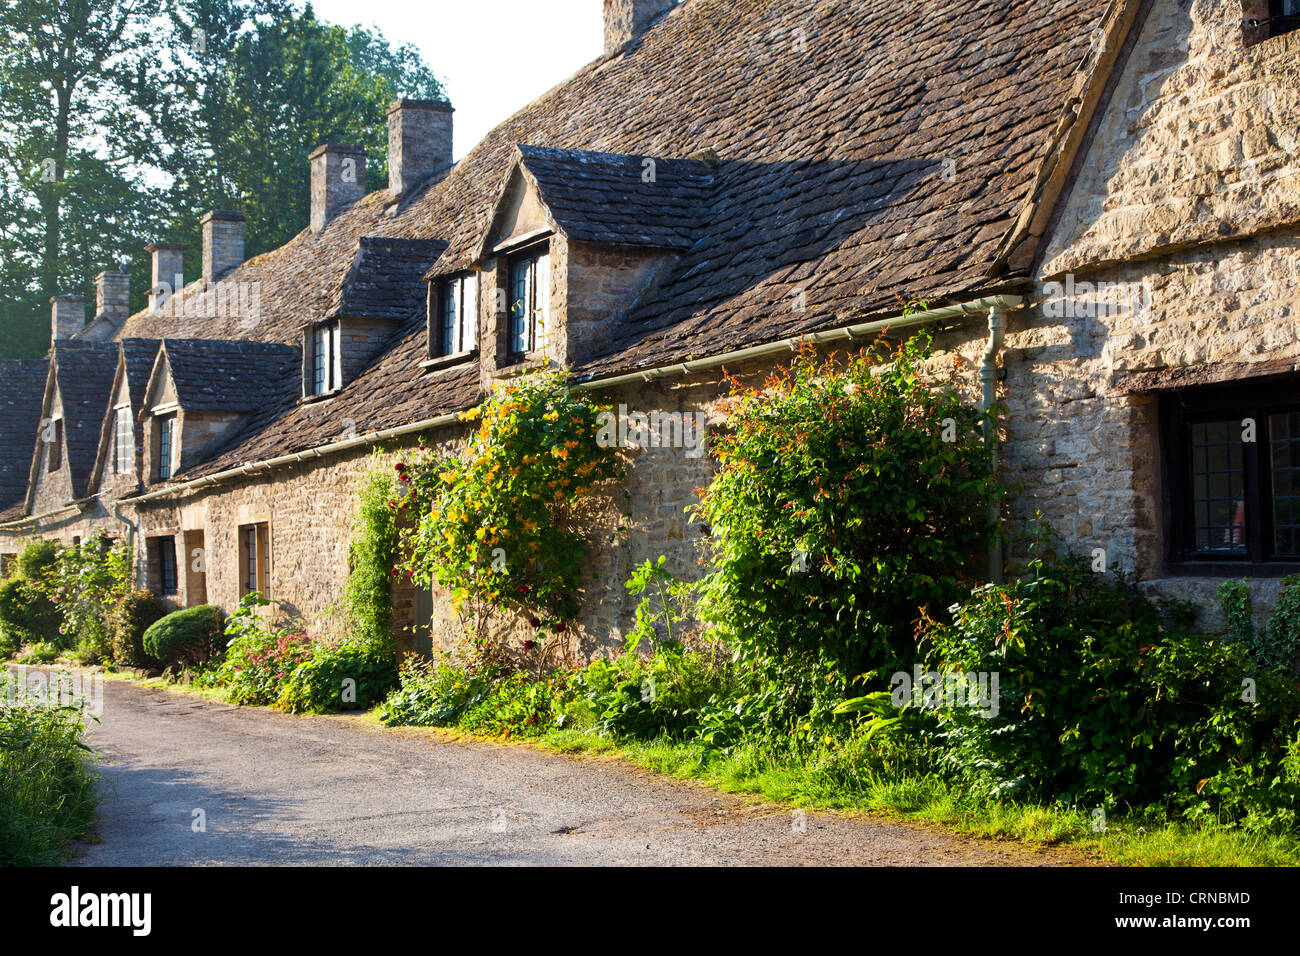 Famous row of weavers cottages,Arlington Row,built in 1380 as a monastic wool store. Bibury Cotswolds Gloucestershire England UK Stock Photo